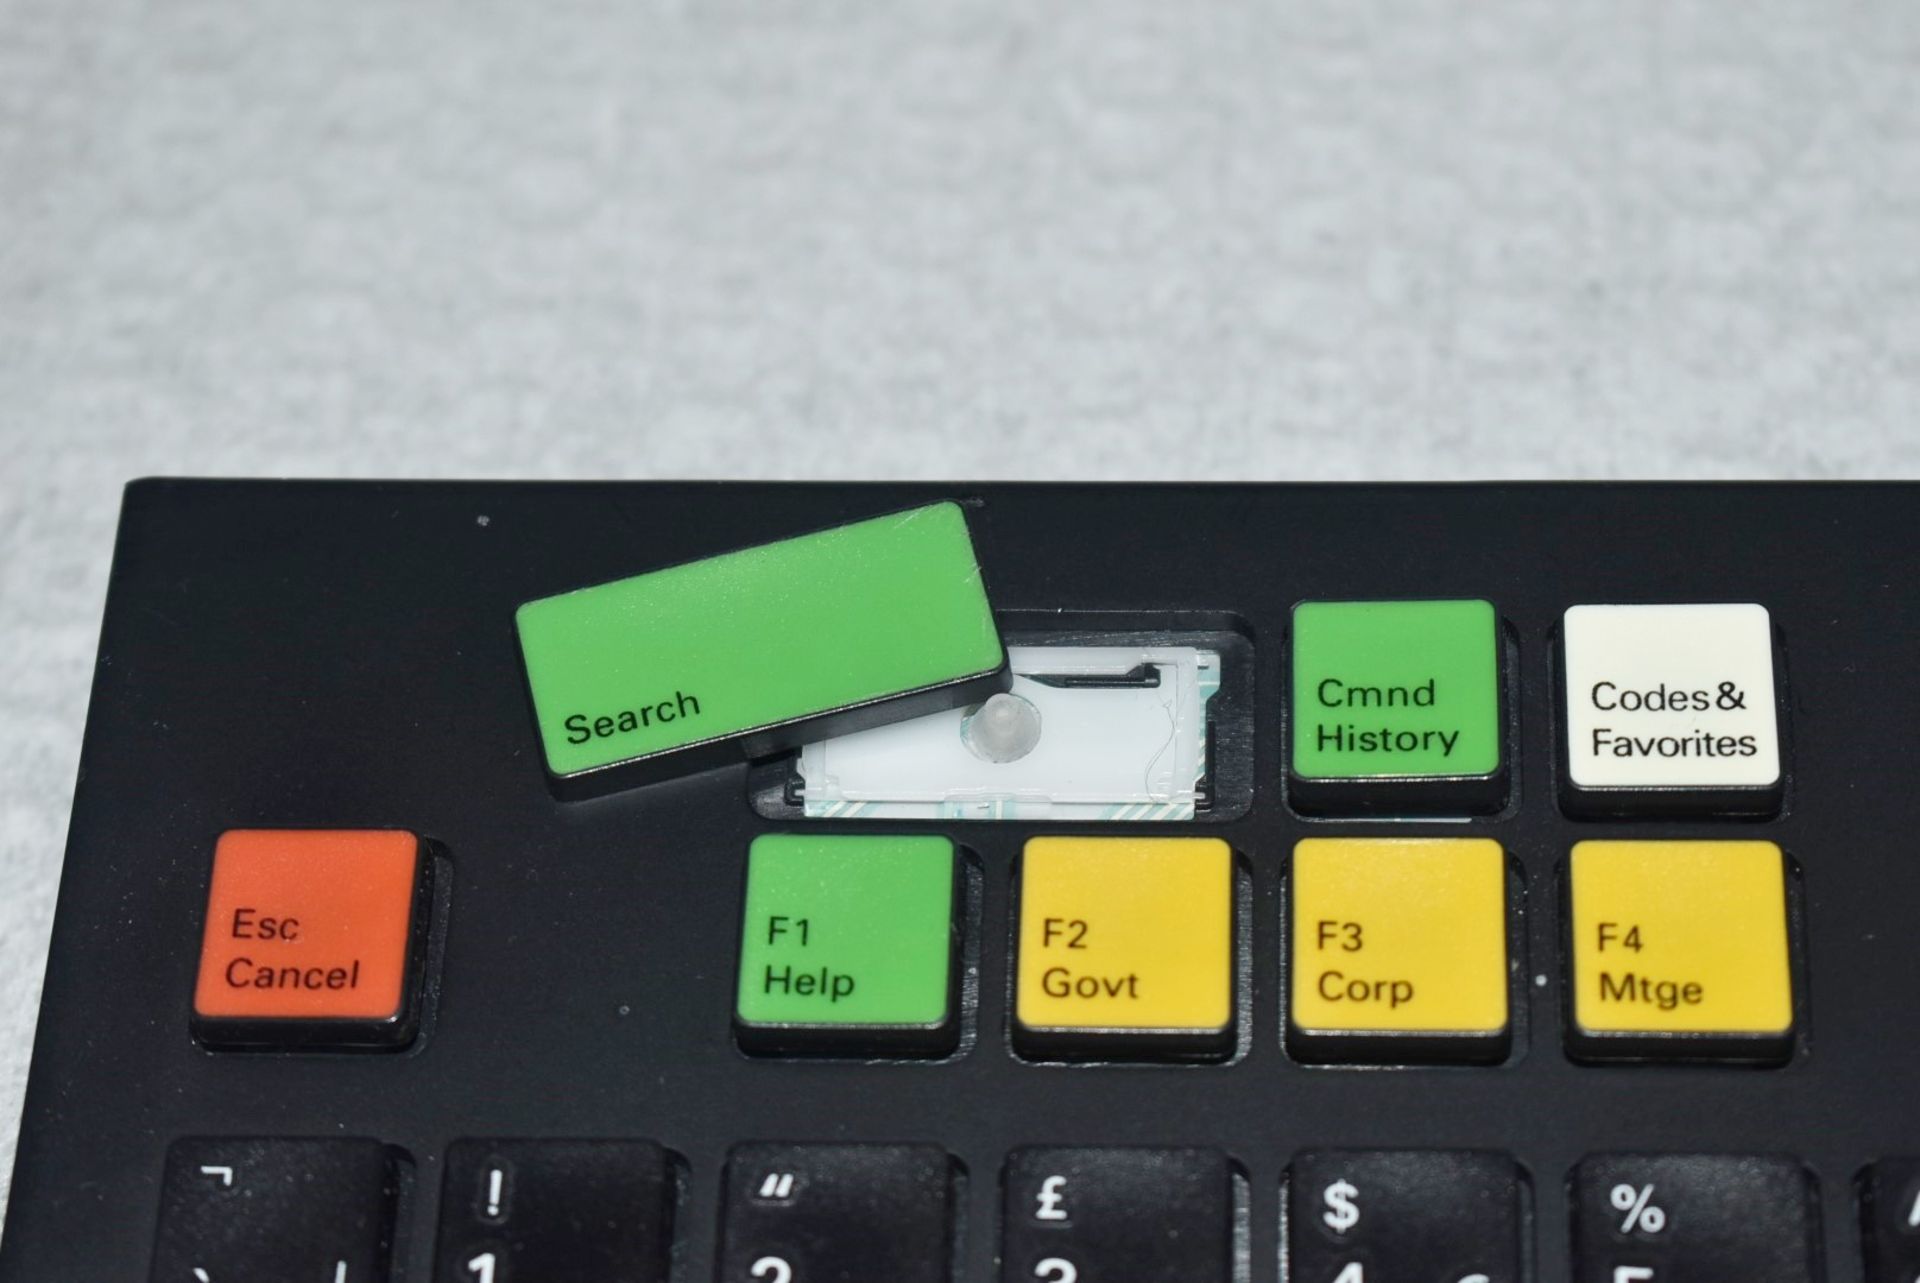 1 x Bloomberg STB100 Financial/Trading Keyboard with Fingerprint Scanner - Ref: MPC554 CG - - Image 6 of 7